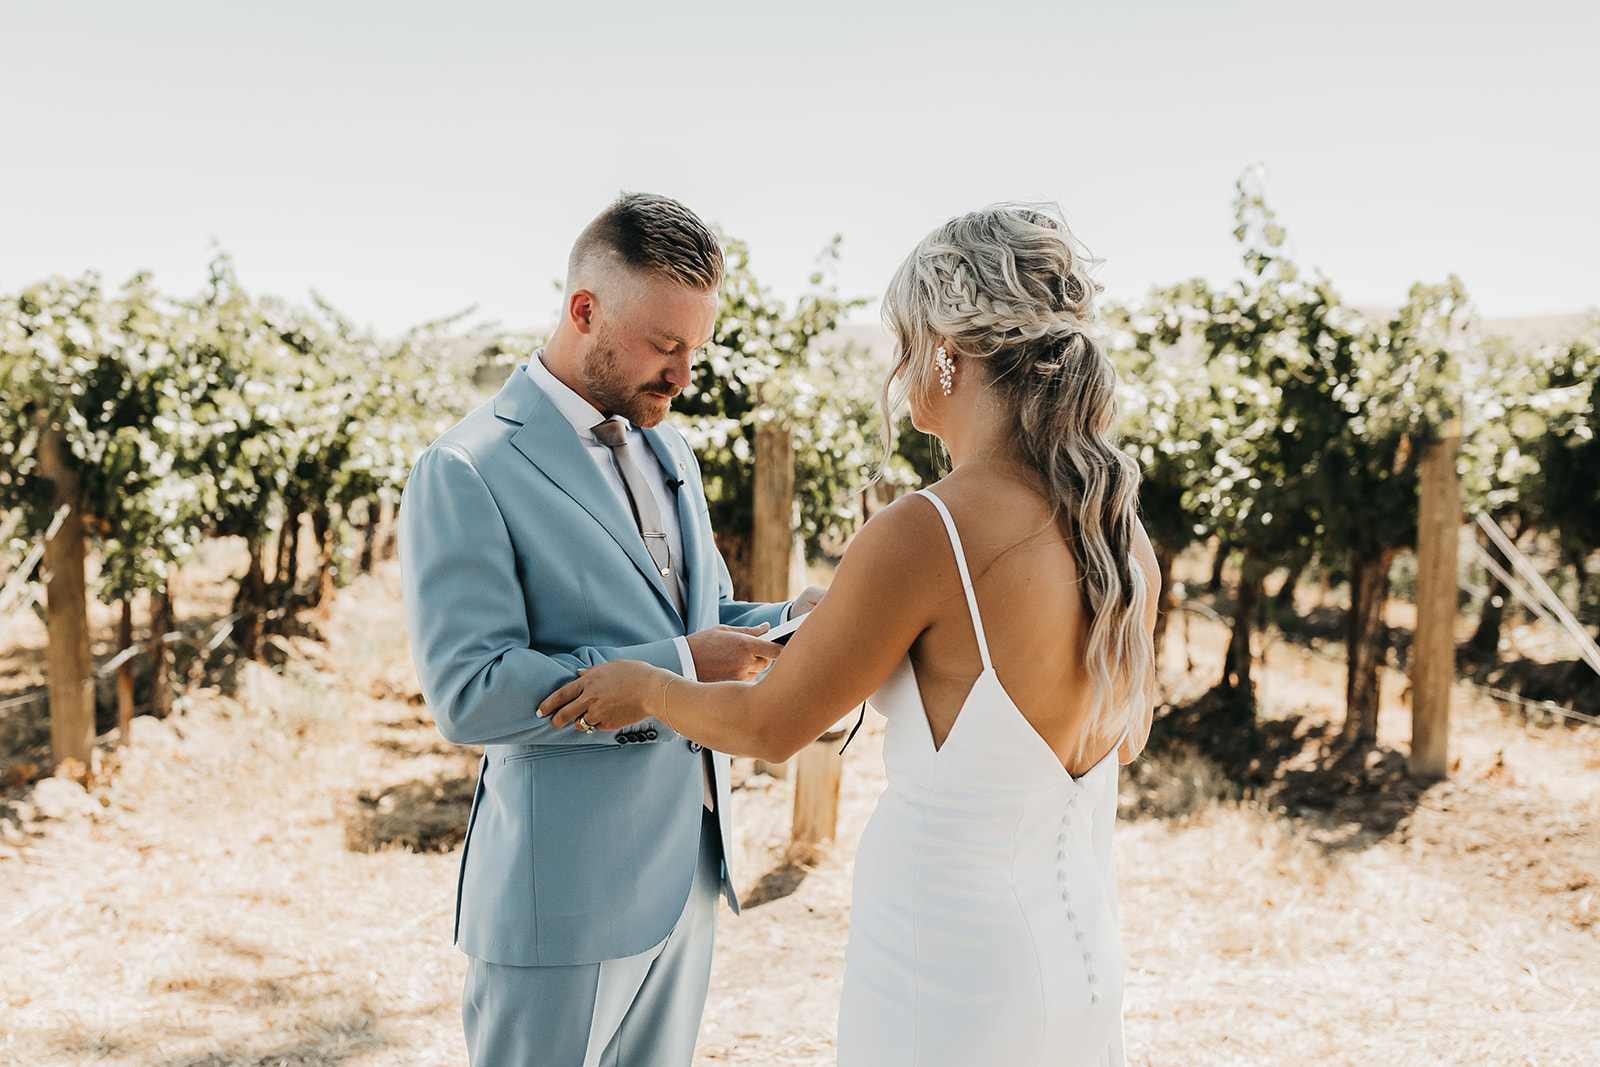 Groom reading vows to bride before wedding surrounded by beautiful rows wine vineyard in Washington